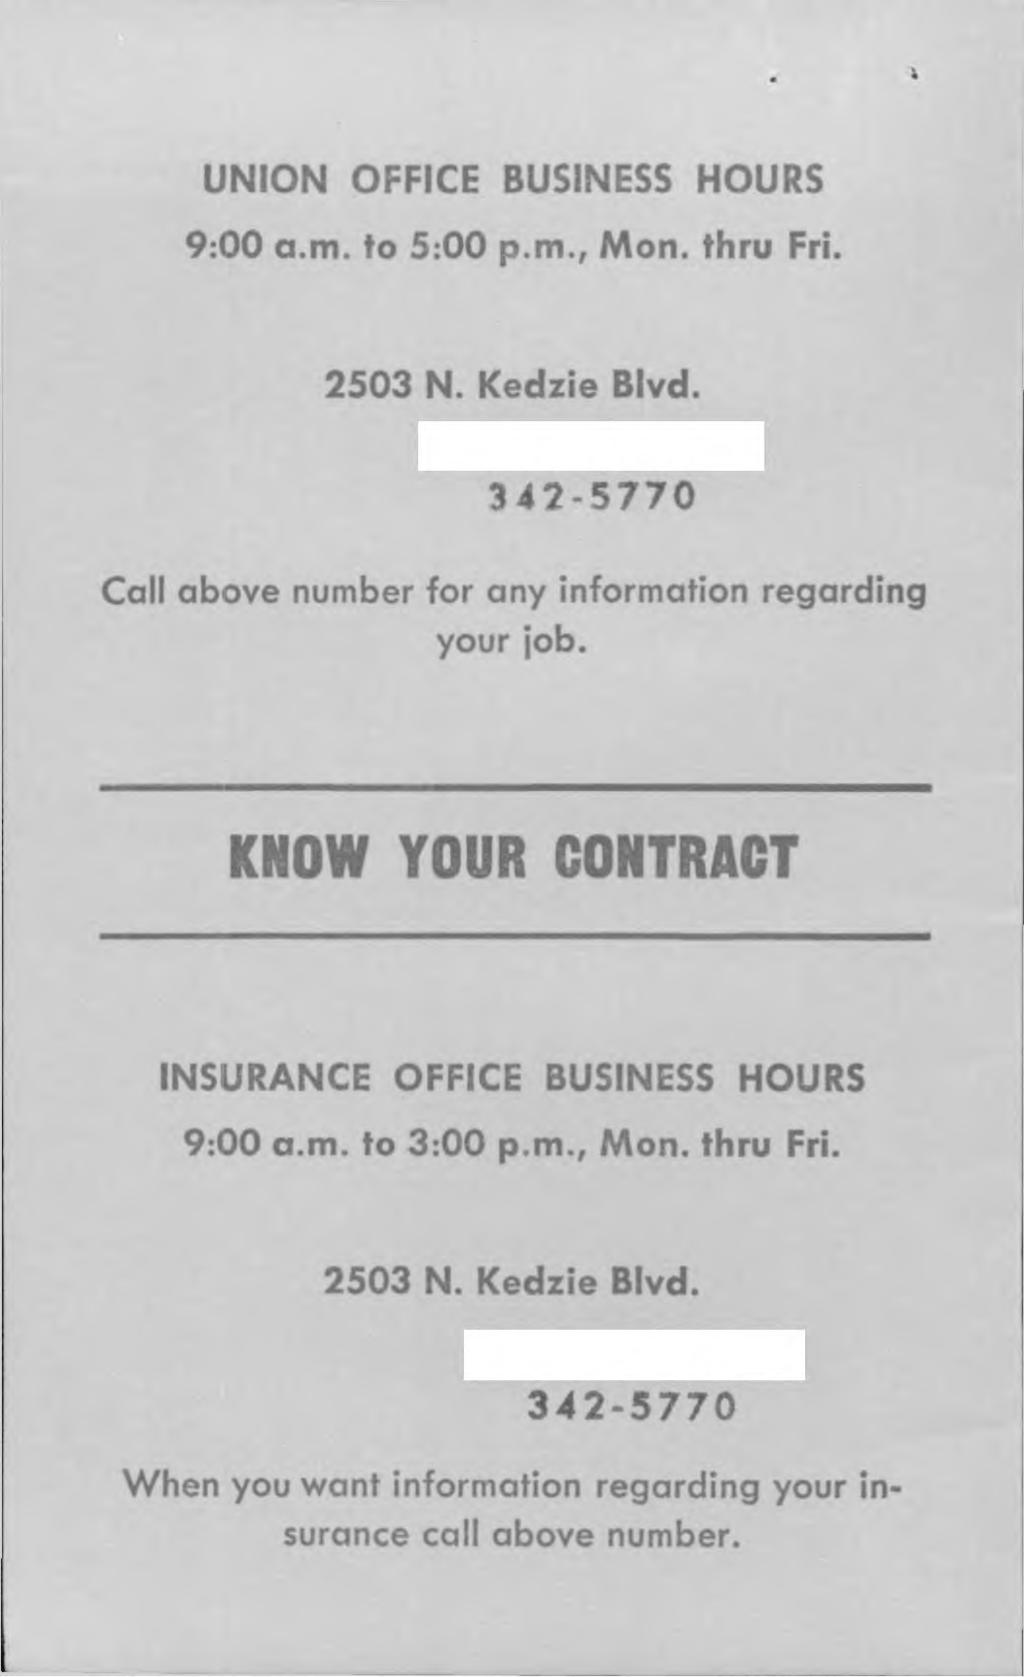 UNION OFFICE BUSINESS HOURS 9:00 a.m. to 5:00 p.m., Mon. thru Fri. 2503 N. Kedzie Blvd. 342-5770 Call above number for any information regarding your job.